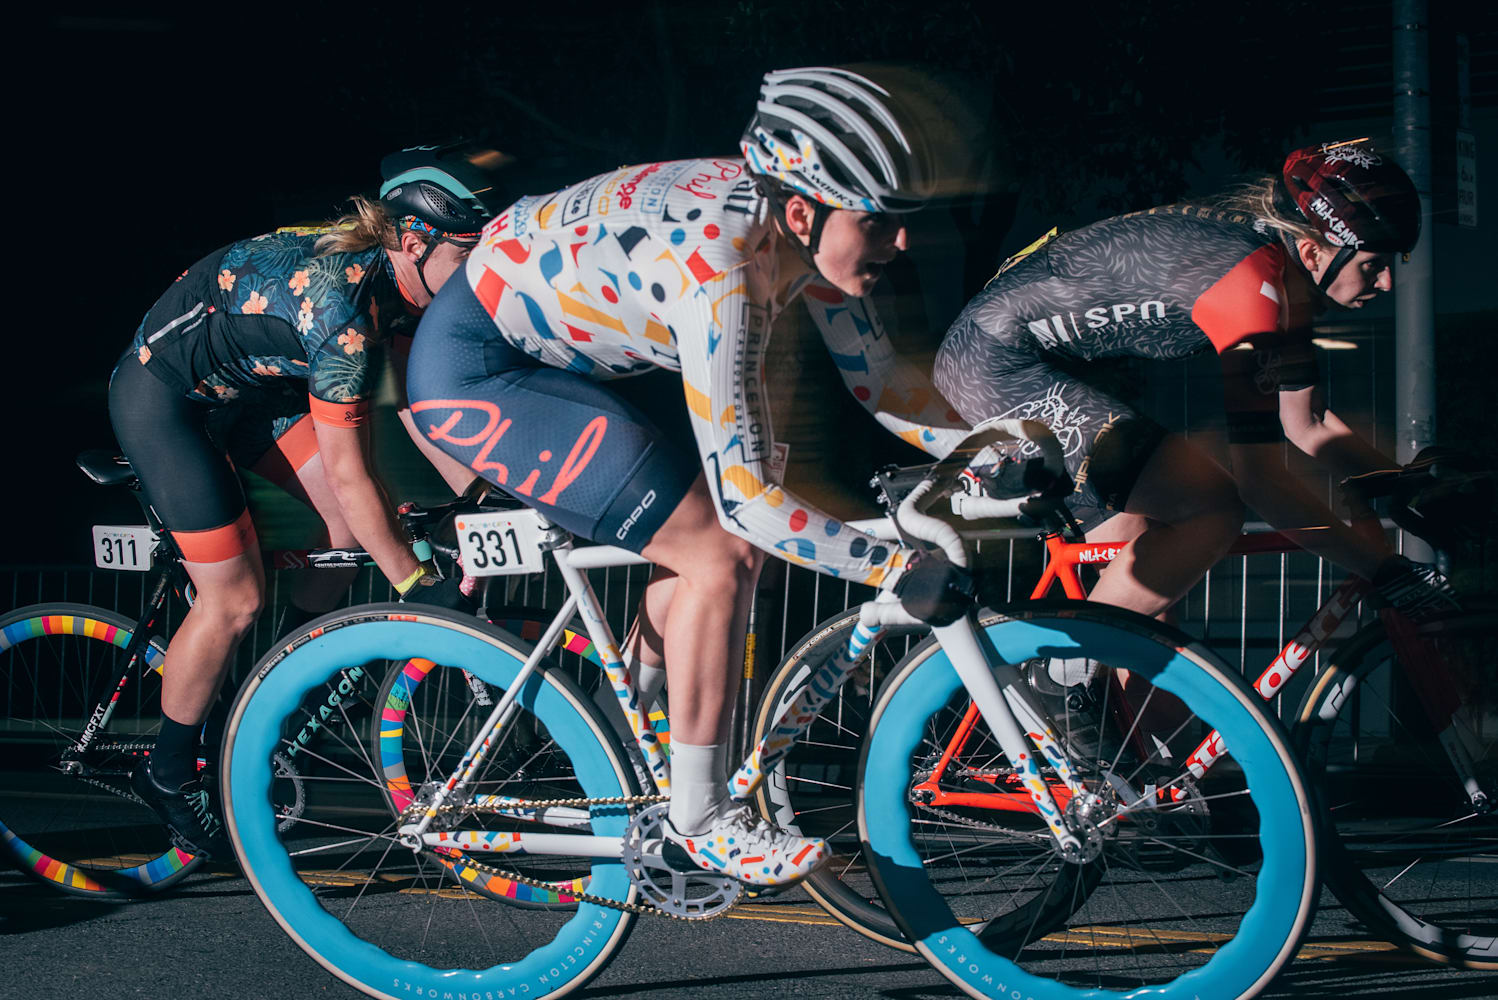 The Criterium & Fixed Gear Racing